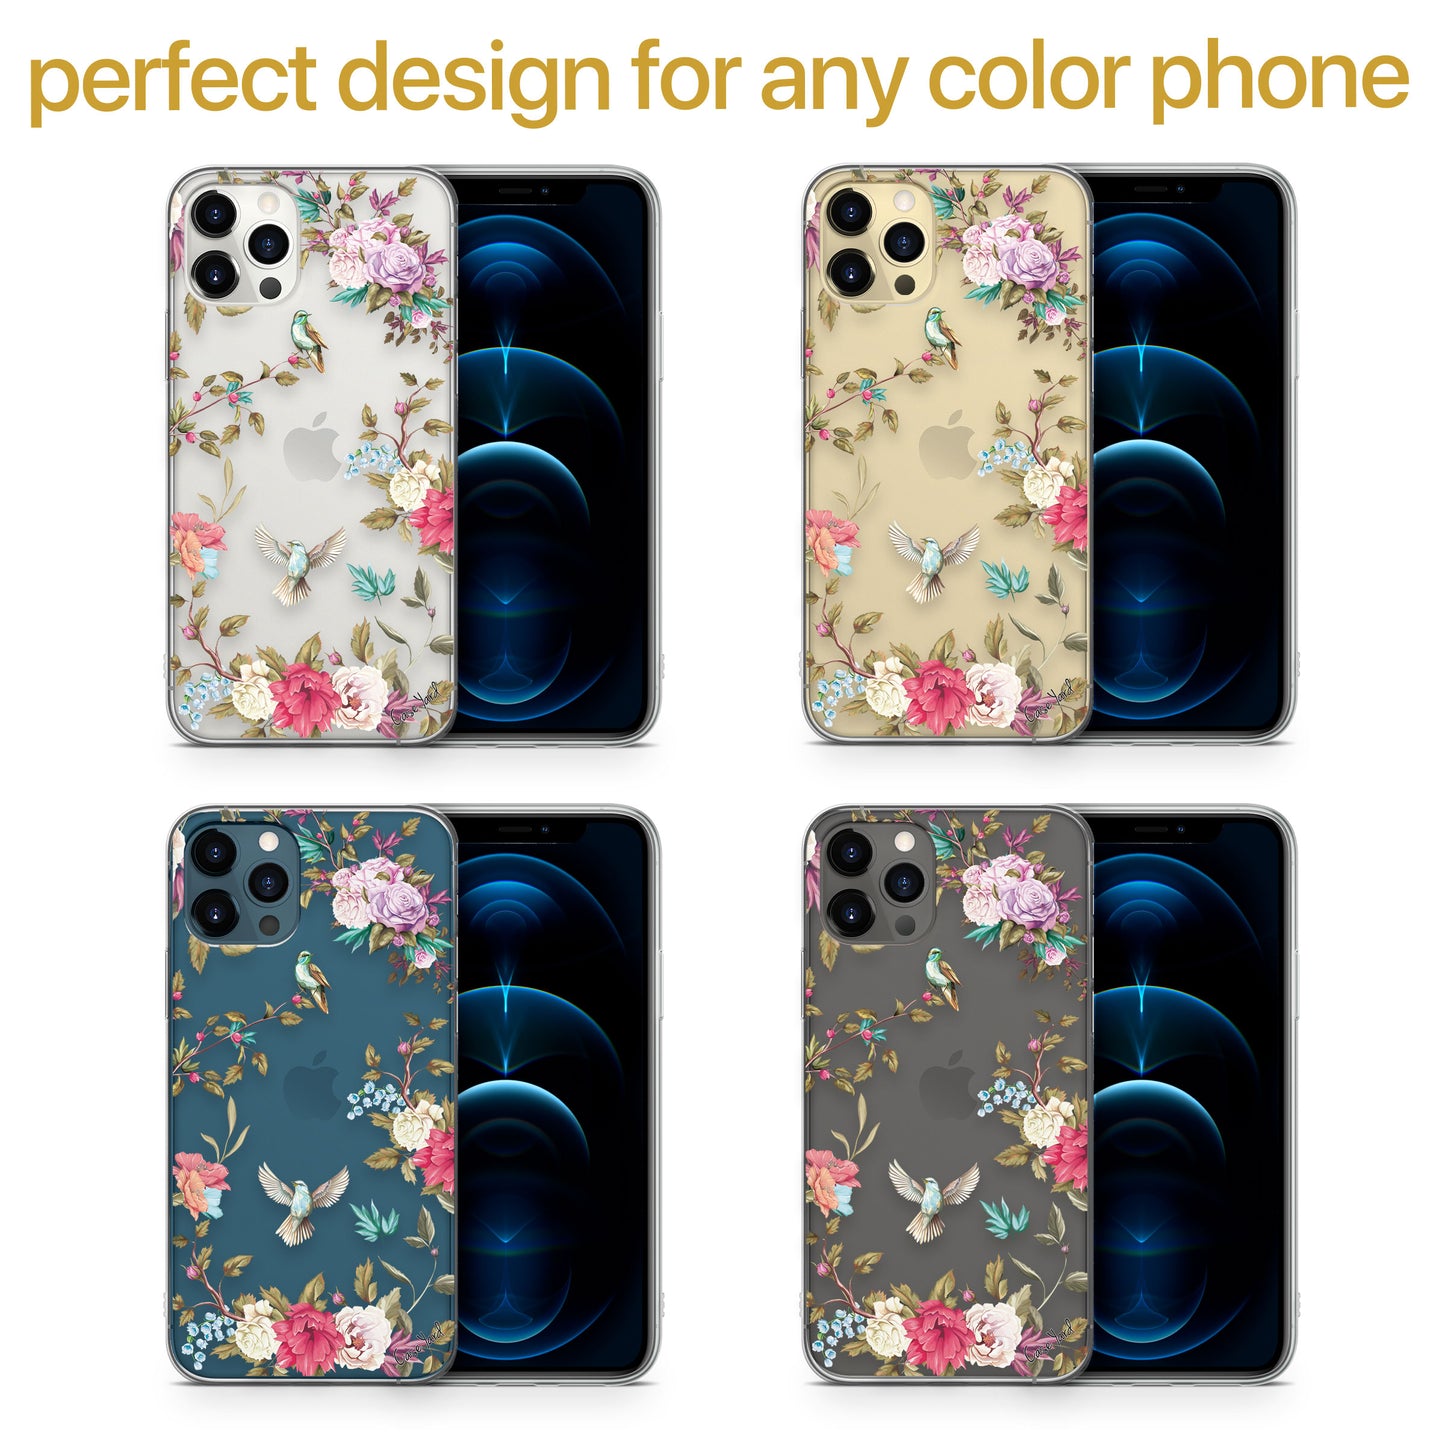 TPU Case Clear case with (Valley Birds) Design for iPhone & Samsung Phones